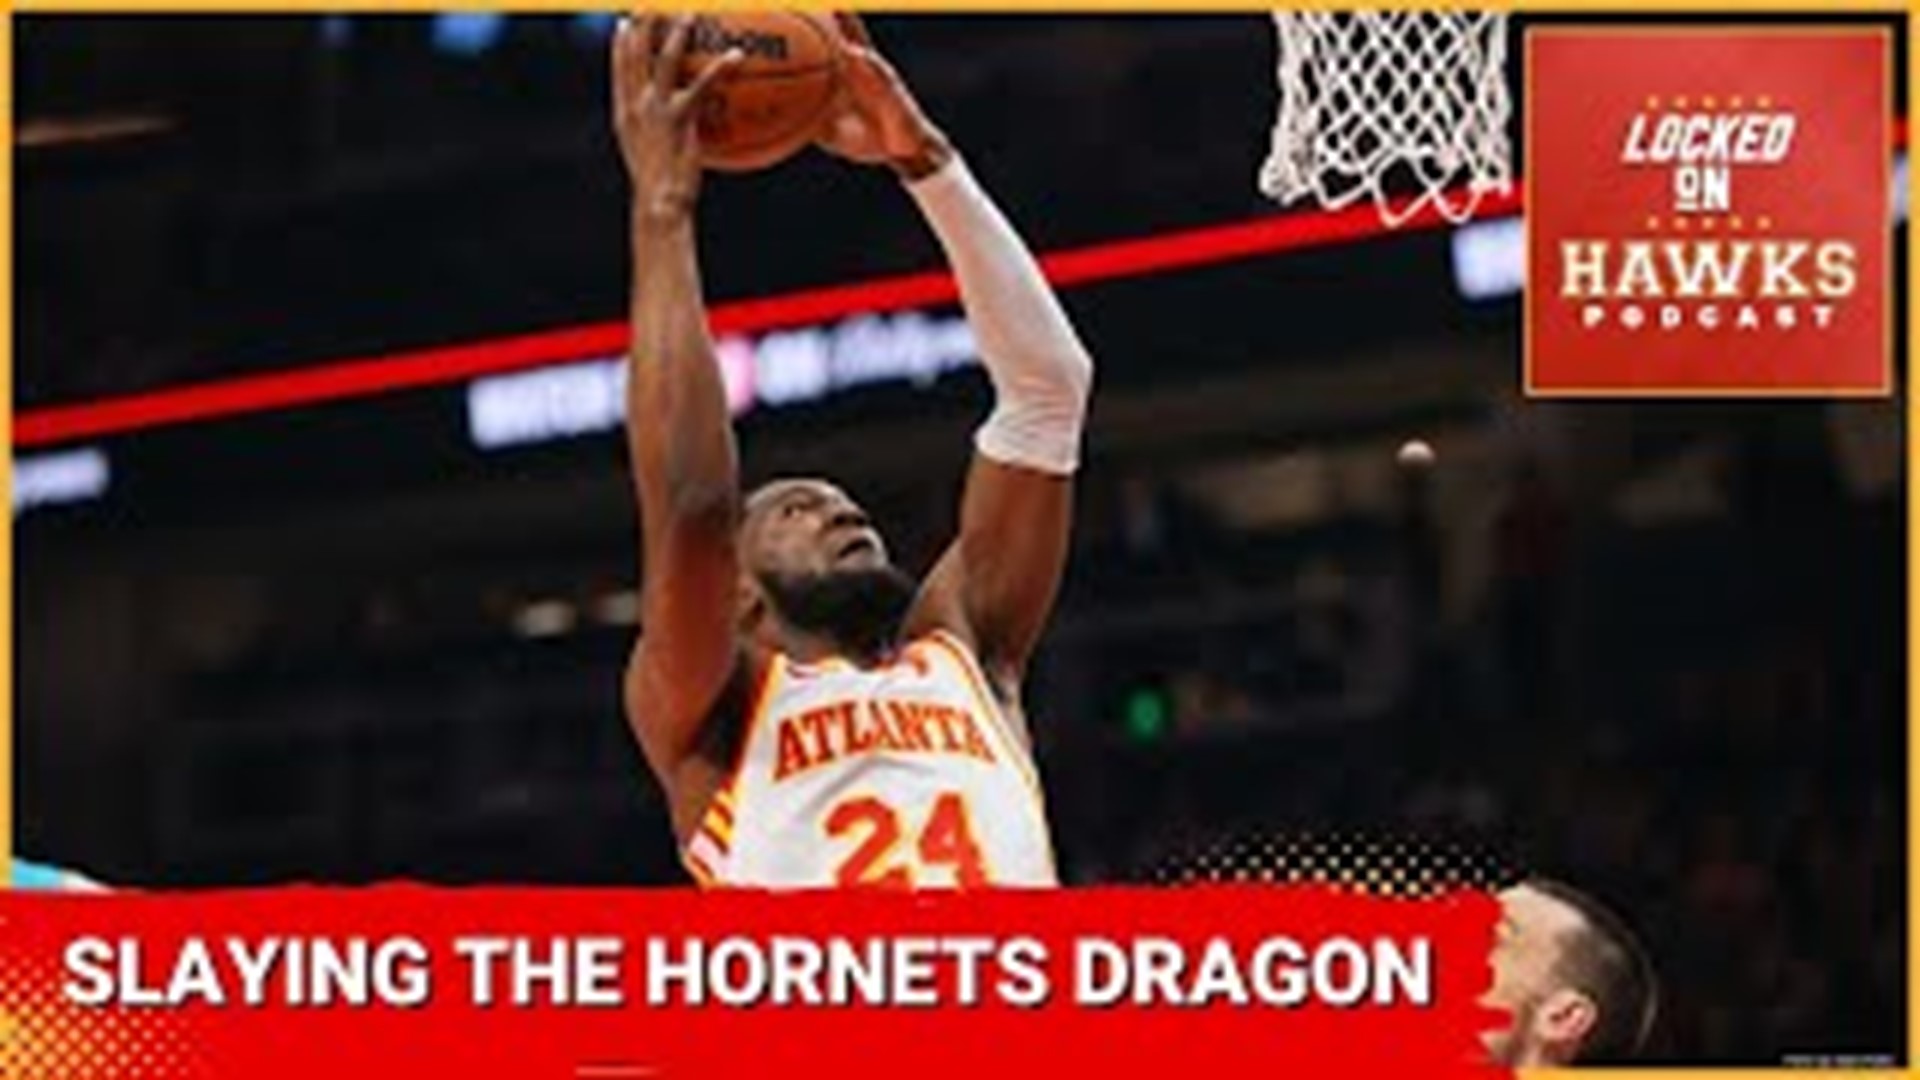 Brad Rowland hosts episode No. 1680 of the Locked on Hawks podcast. The show breaks down Saturday's game between the Atlanta Hawks and the Charlotte Hornets.